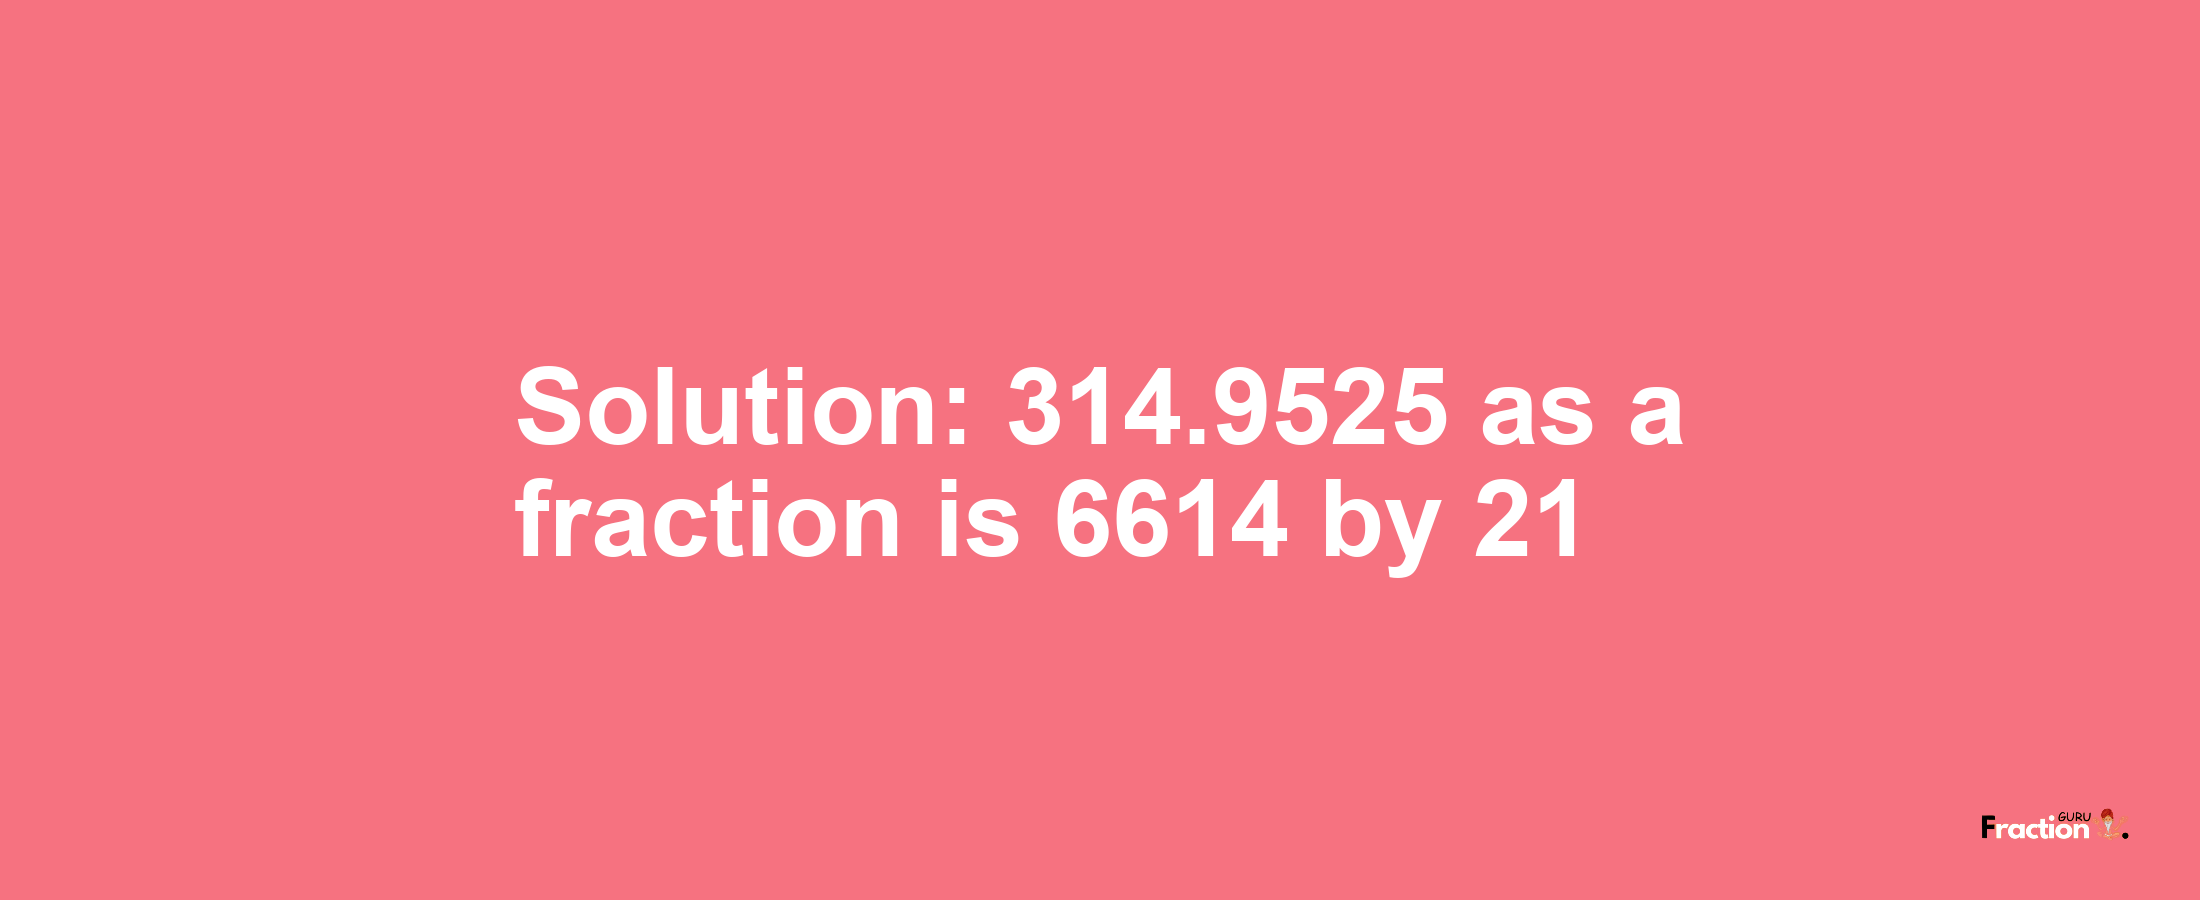 Solution:314.9525 as a fraction is 6614/21